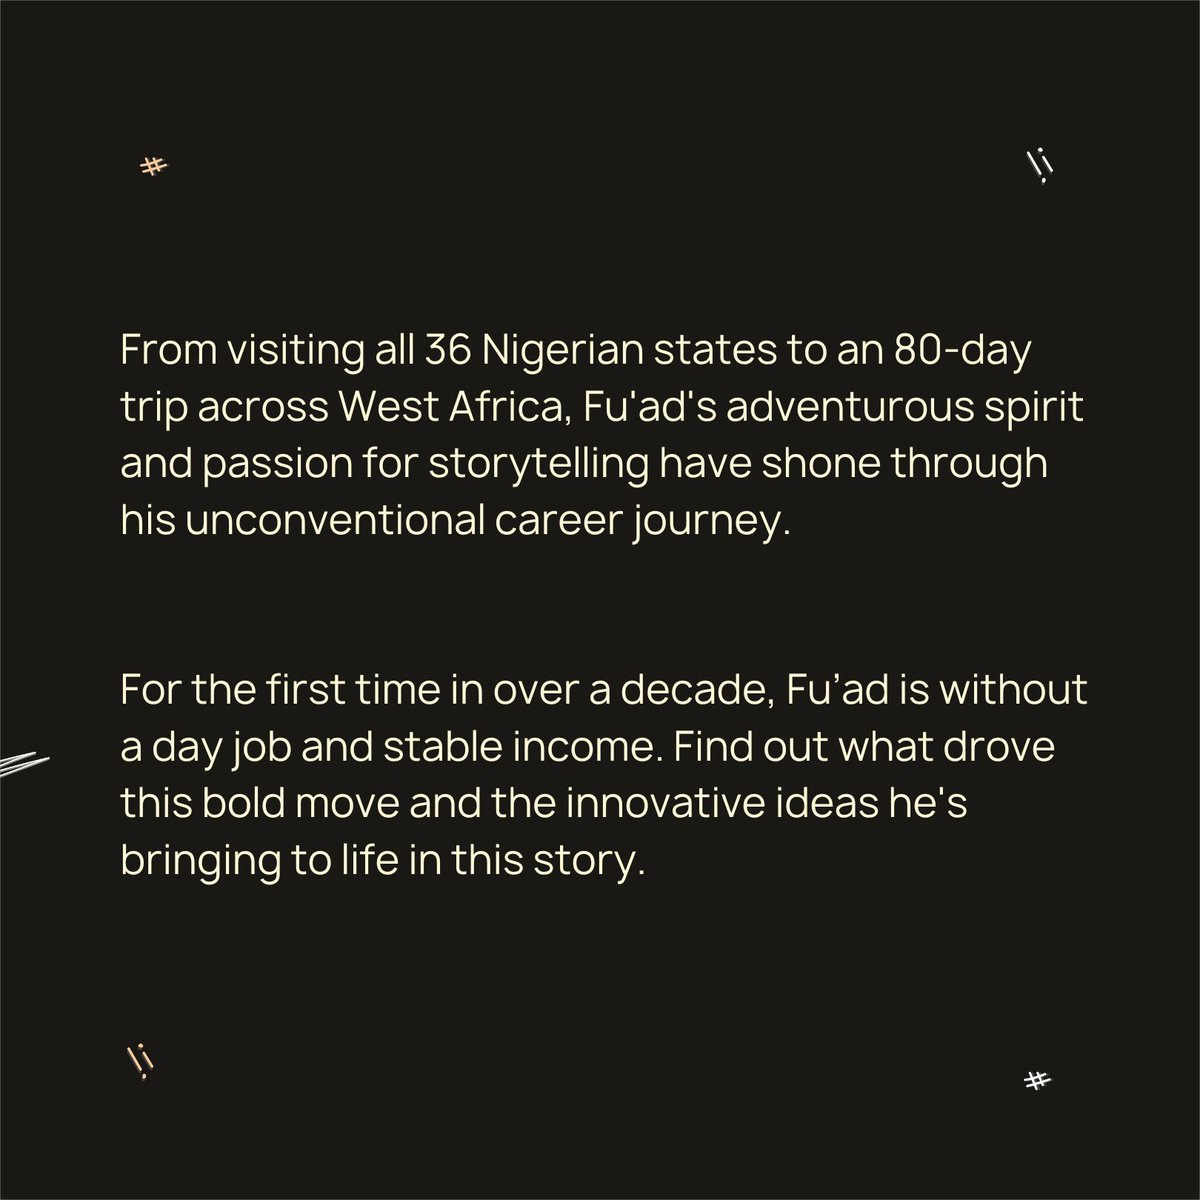 On this month's Brave Series, @oluchukwuijn writes about the fascinating journey of @FuadXIV Discover how this bold storyteller's passion has led him to quit his job to focus on two ambitious projects - @StartArchiving @Vistanium Read Fuad's story: buff.ly/3Qxb87N